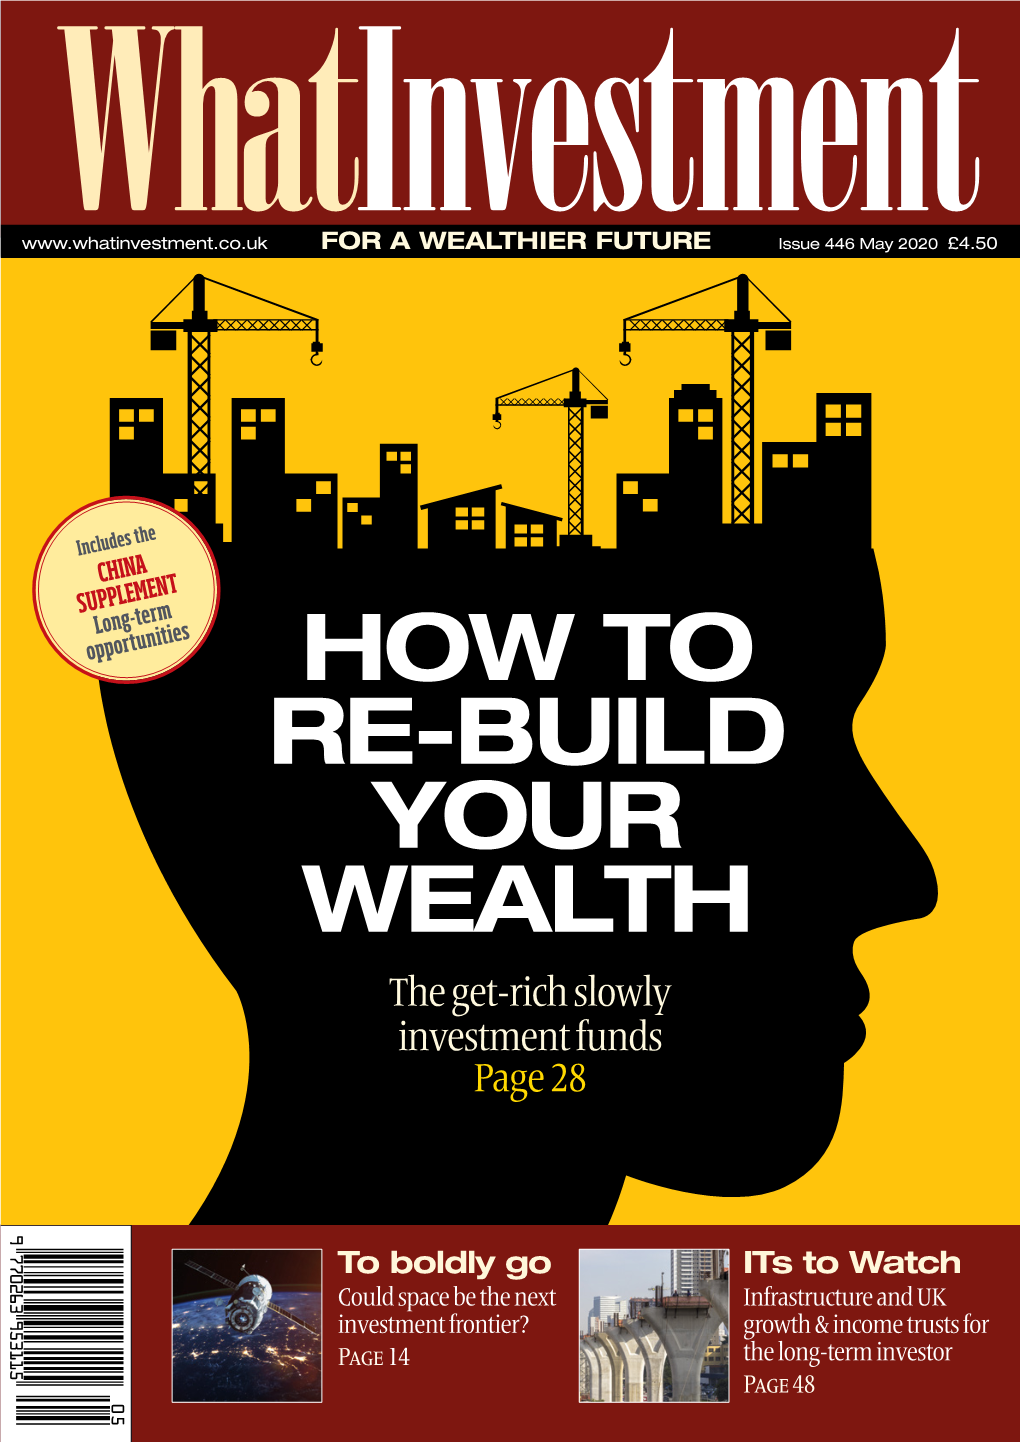 How to Re-Build Your Wealth